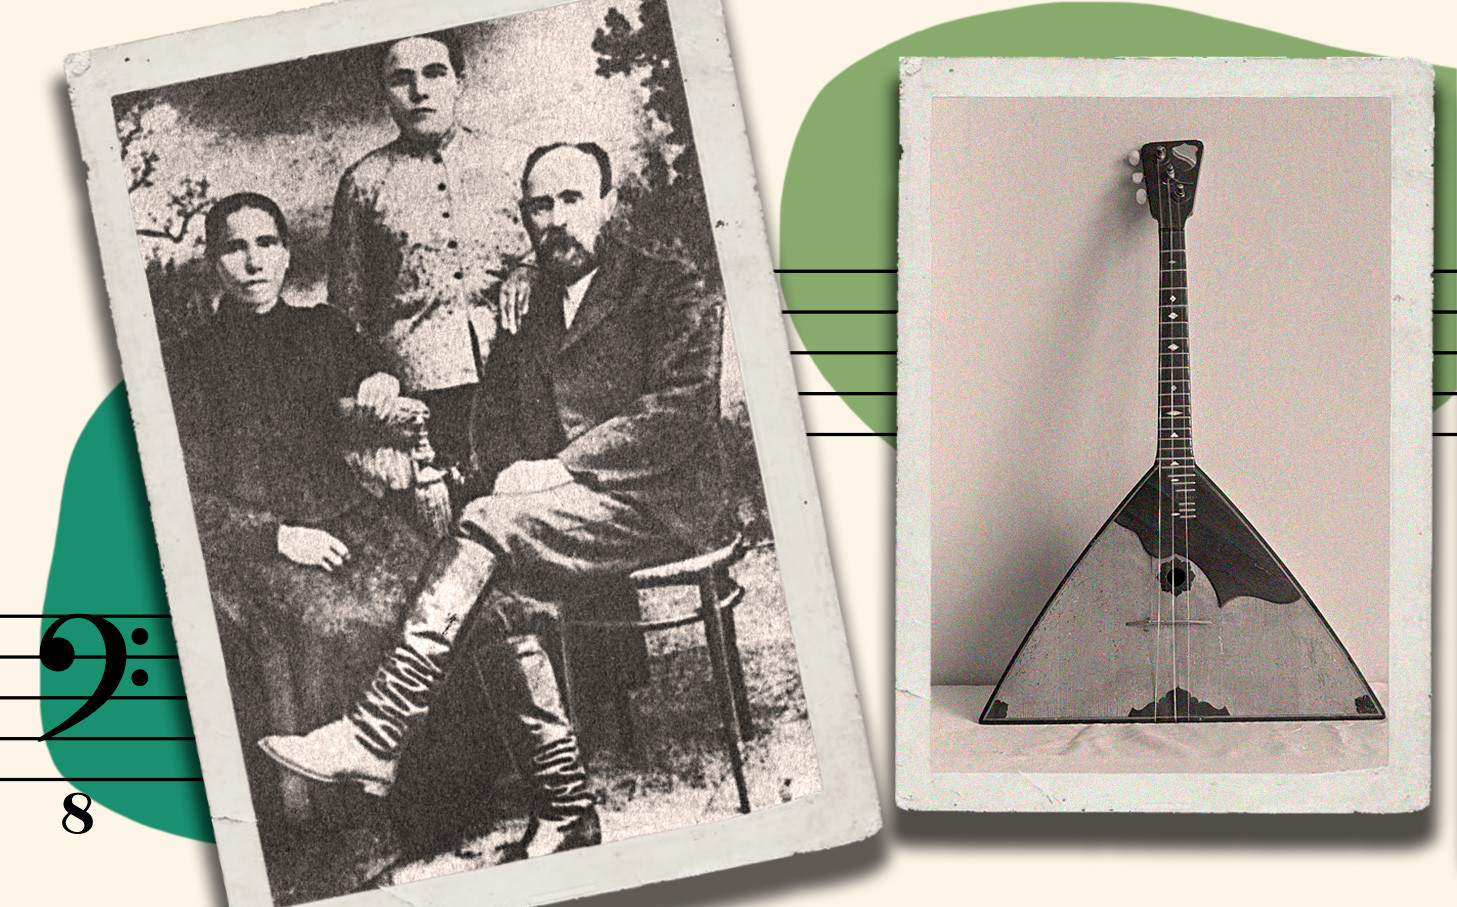 Semen Nalimov with his wife (on the left) and his sister. A traditional folk instrument, balalaika (on the right).